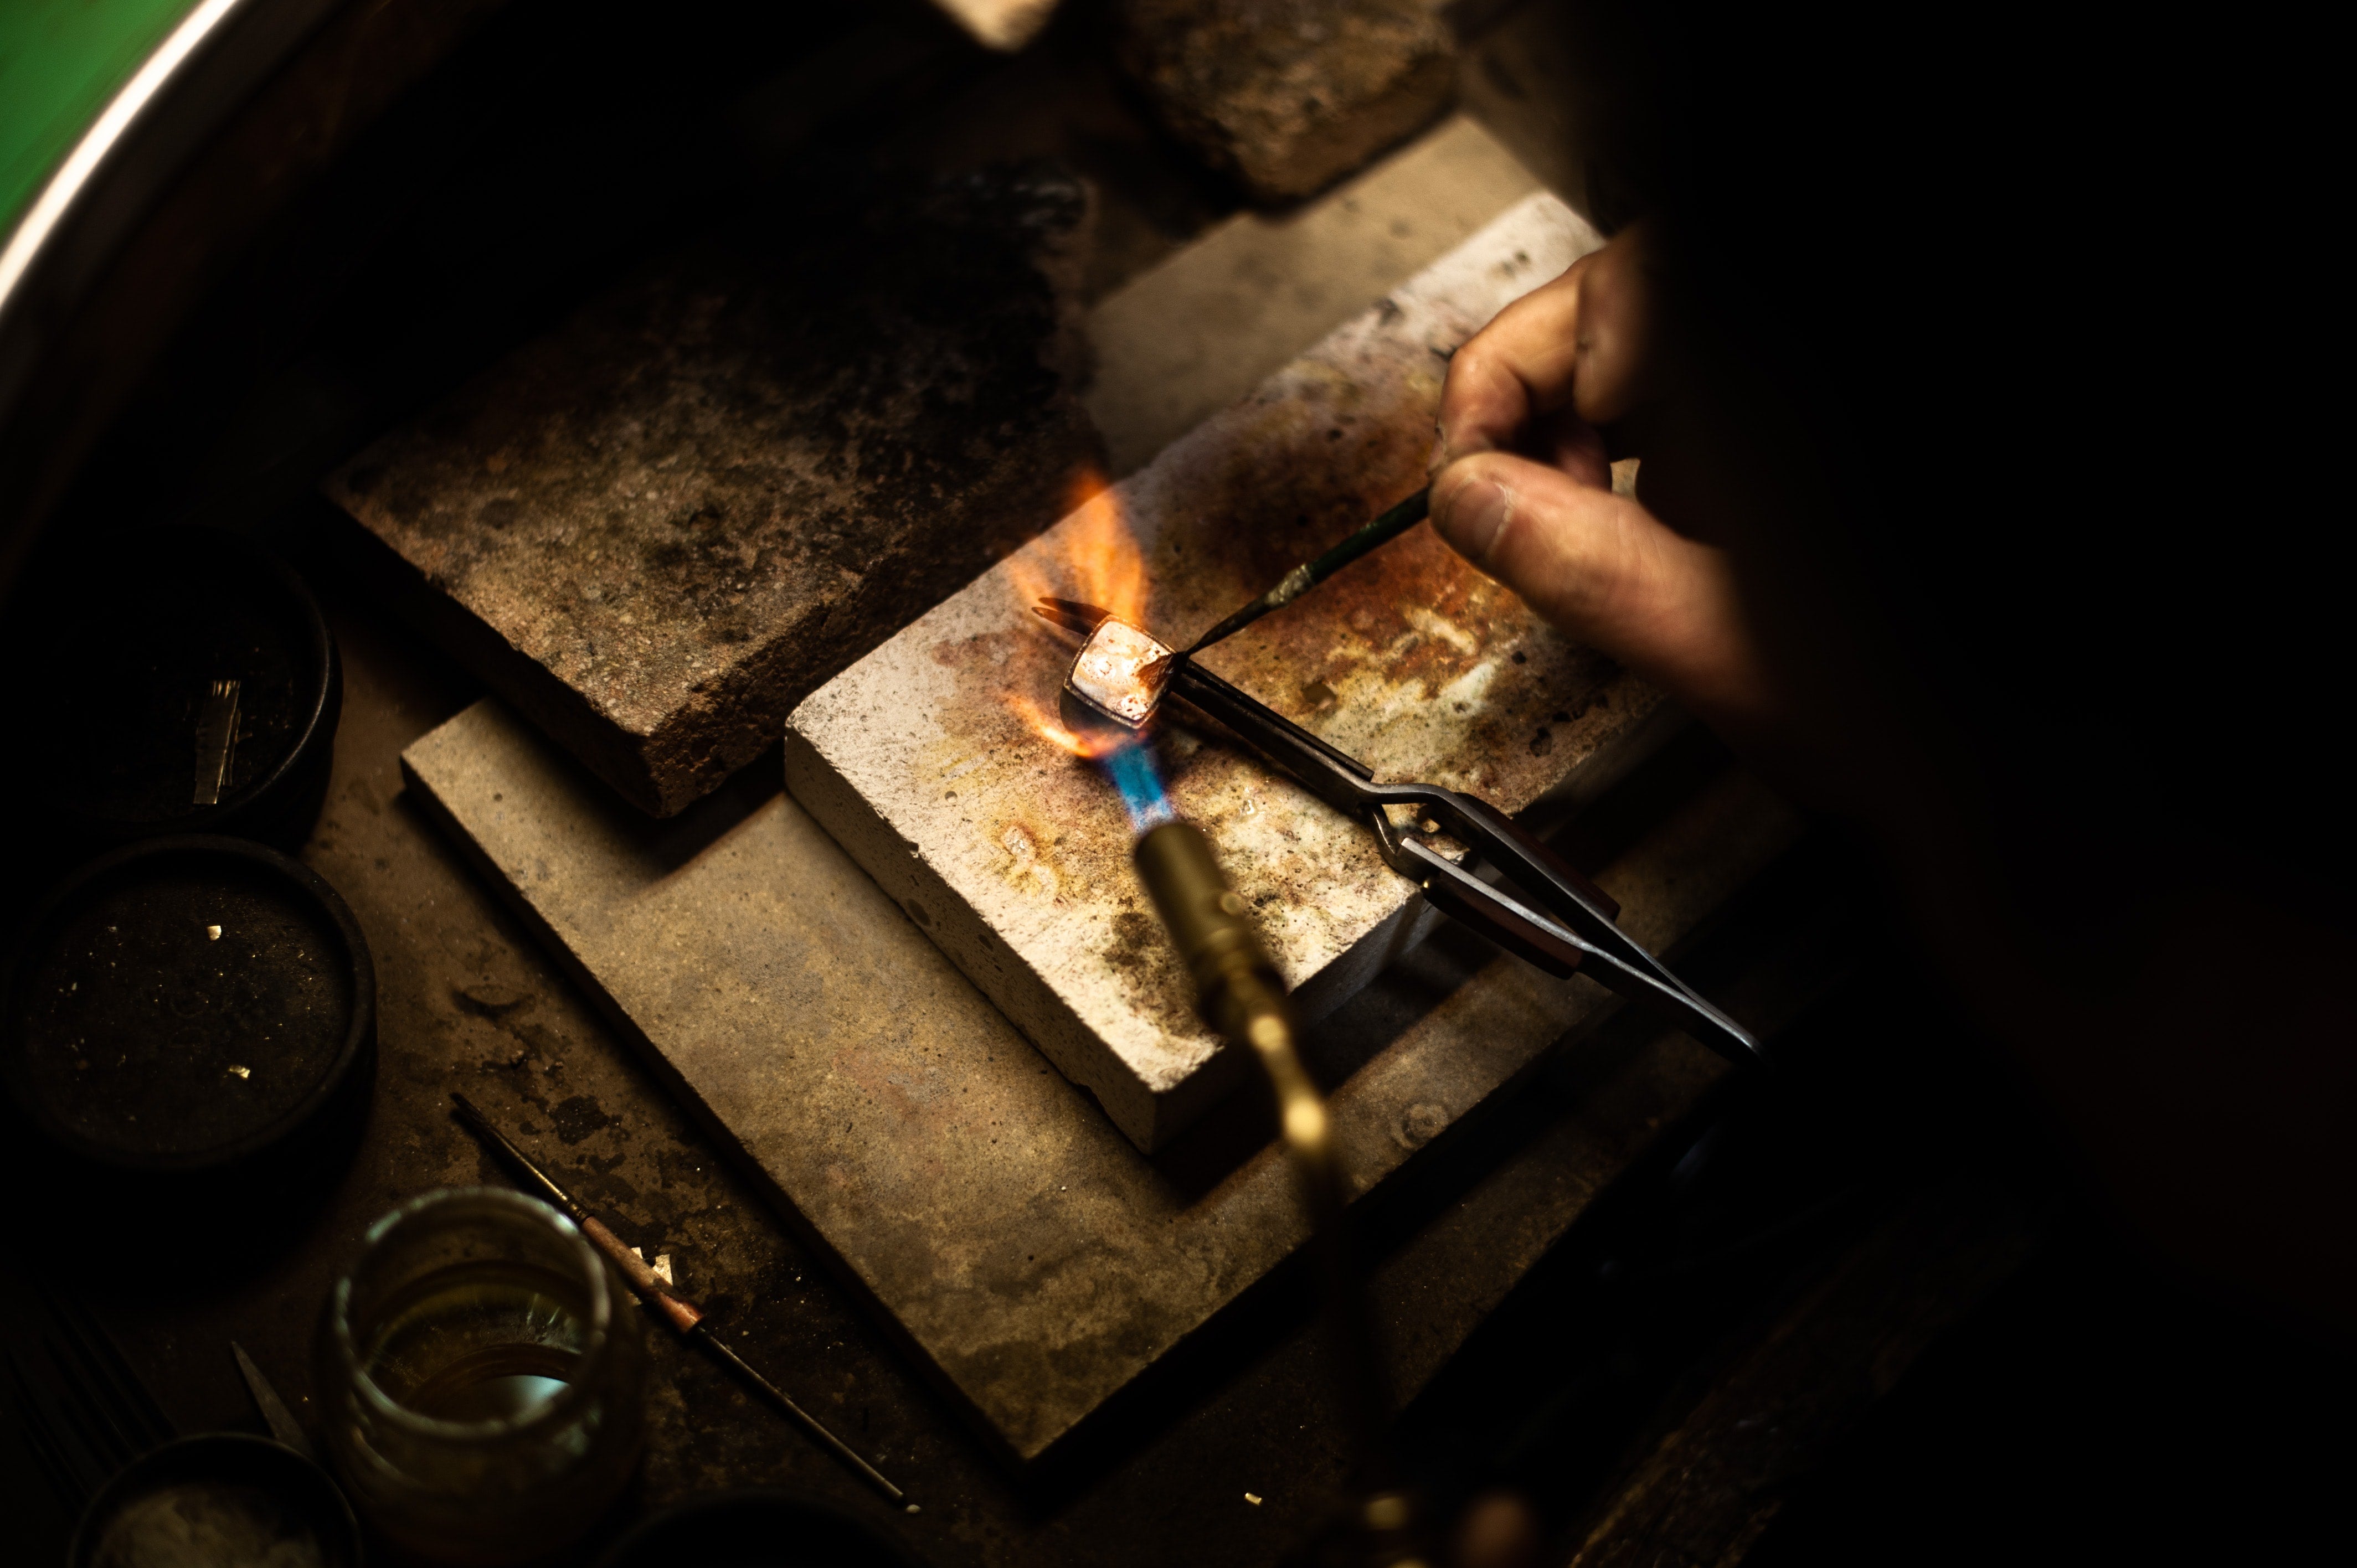 Jeweler using flame to heat up ring for e-coating application